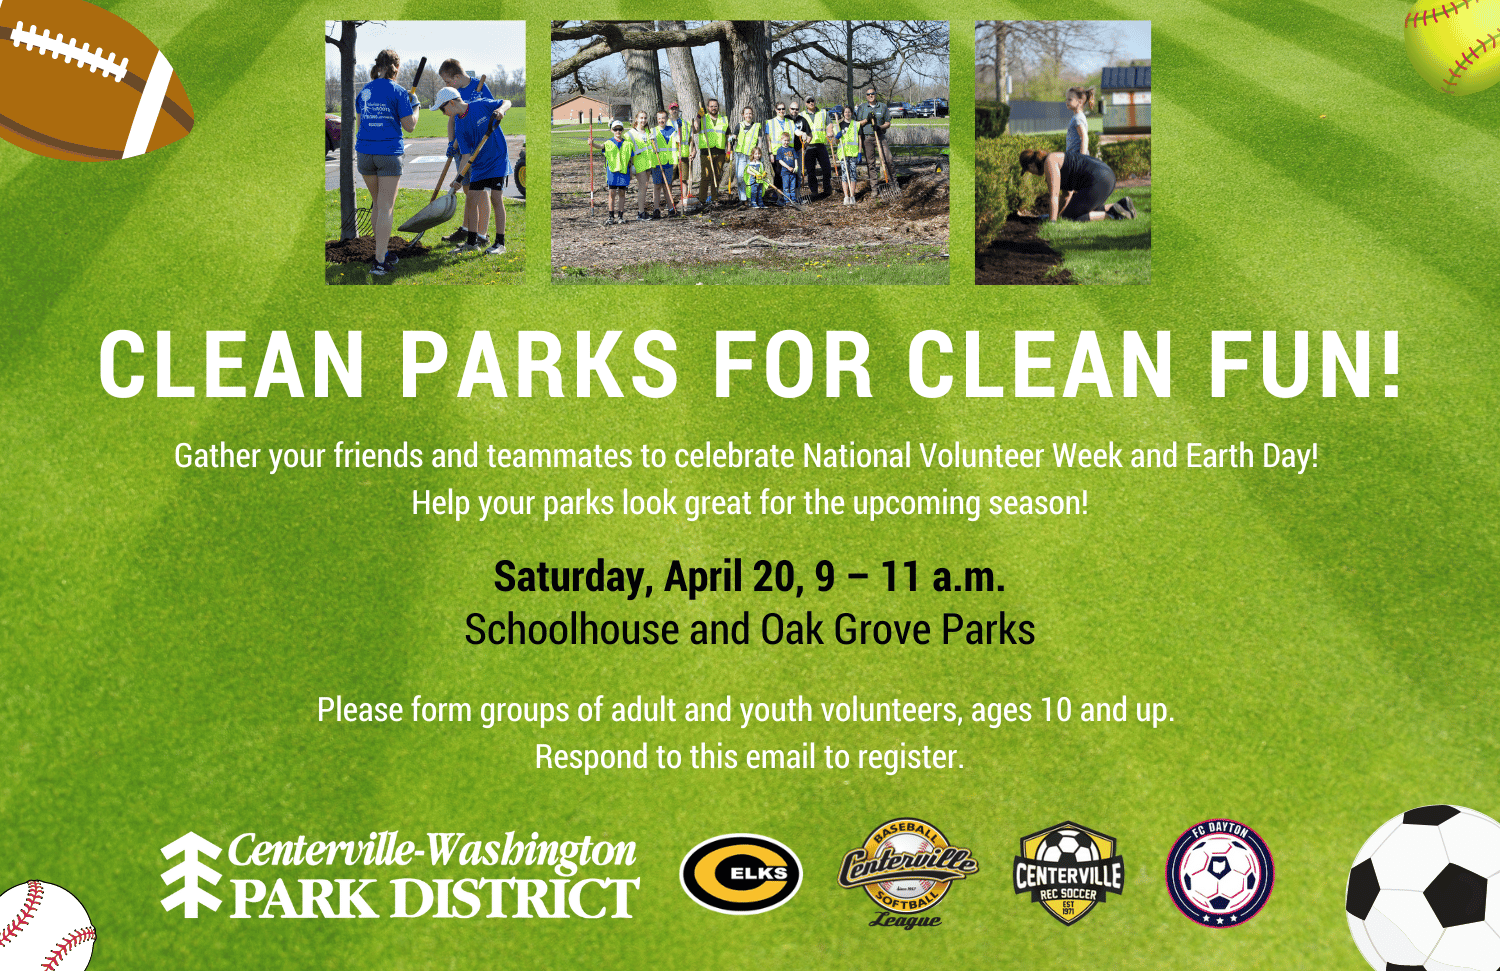 PARK CLEAN-UP DAY!